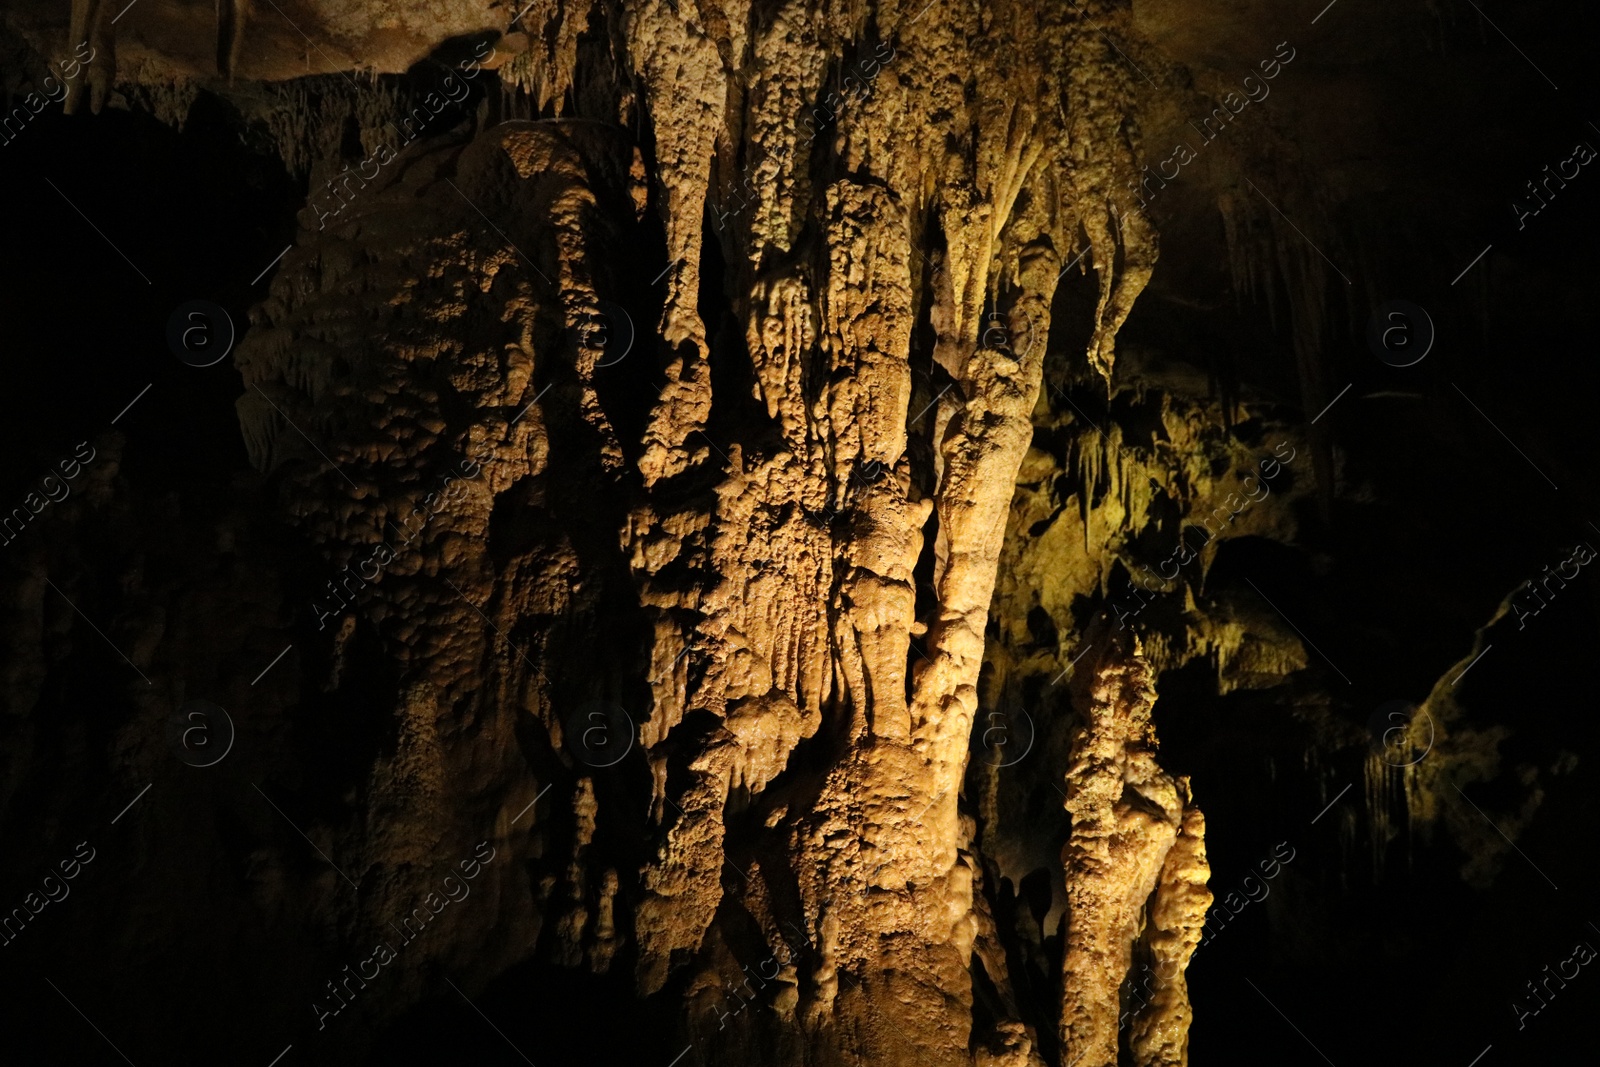 Photo of Picturesque view of many stalactite and stalagmite formations in cave